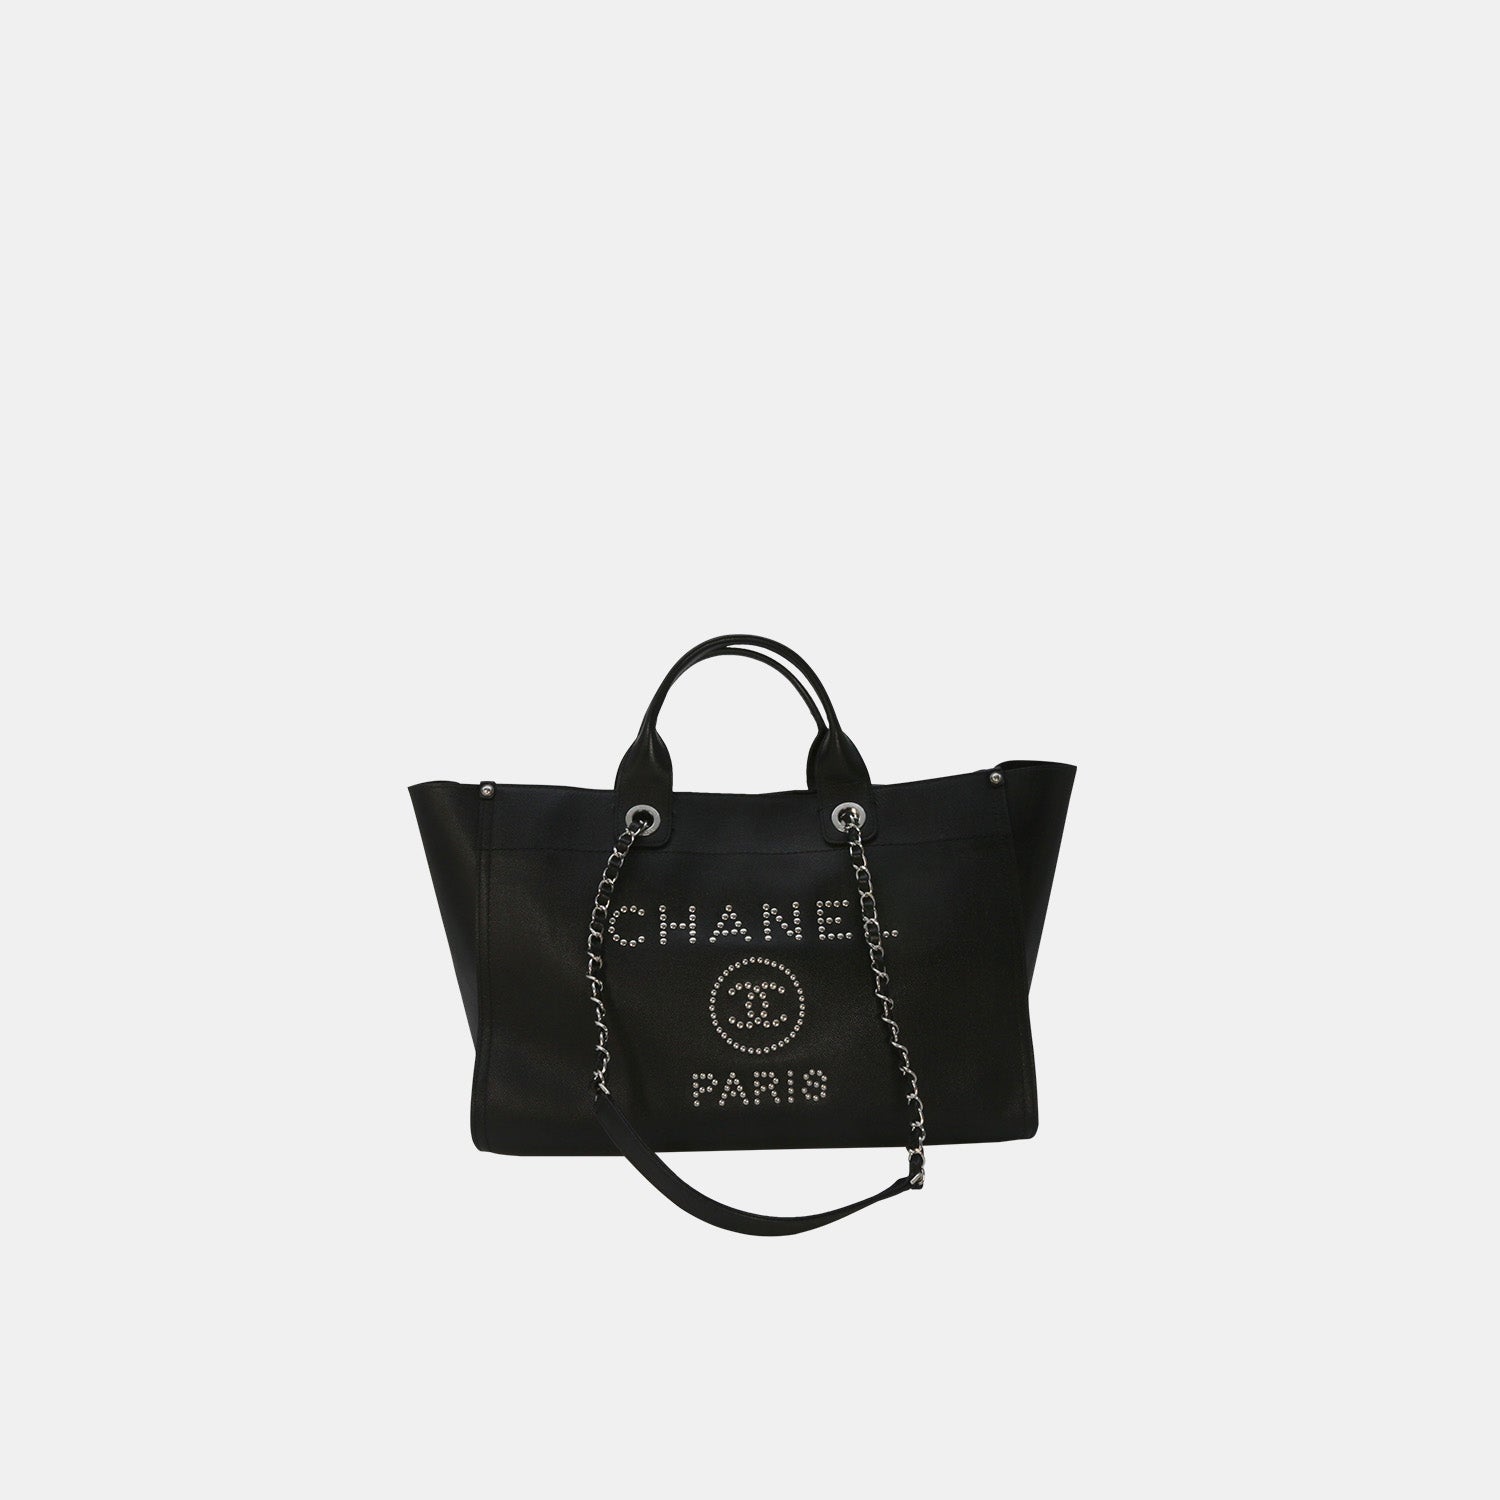 Chanel Deauville Medium shopping tote in blue tweed 20A